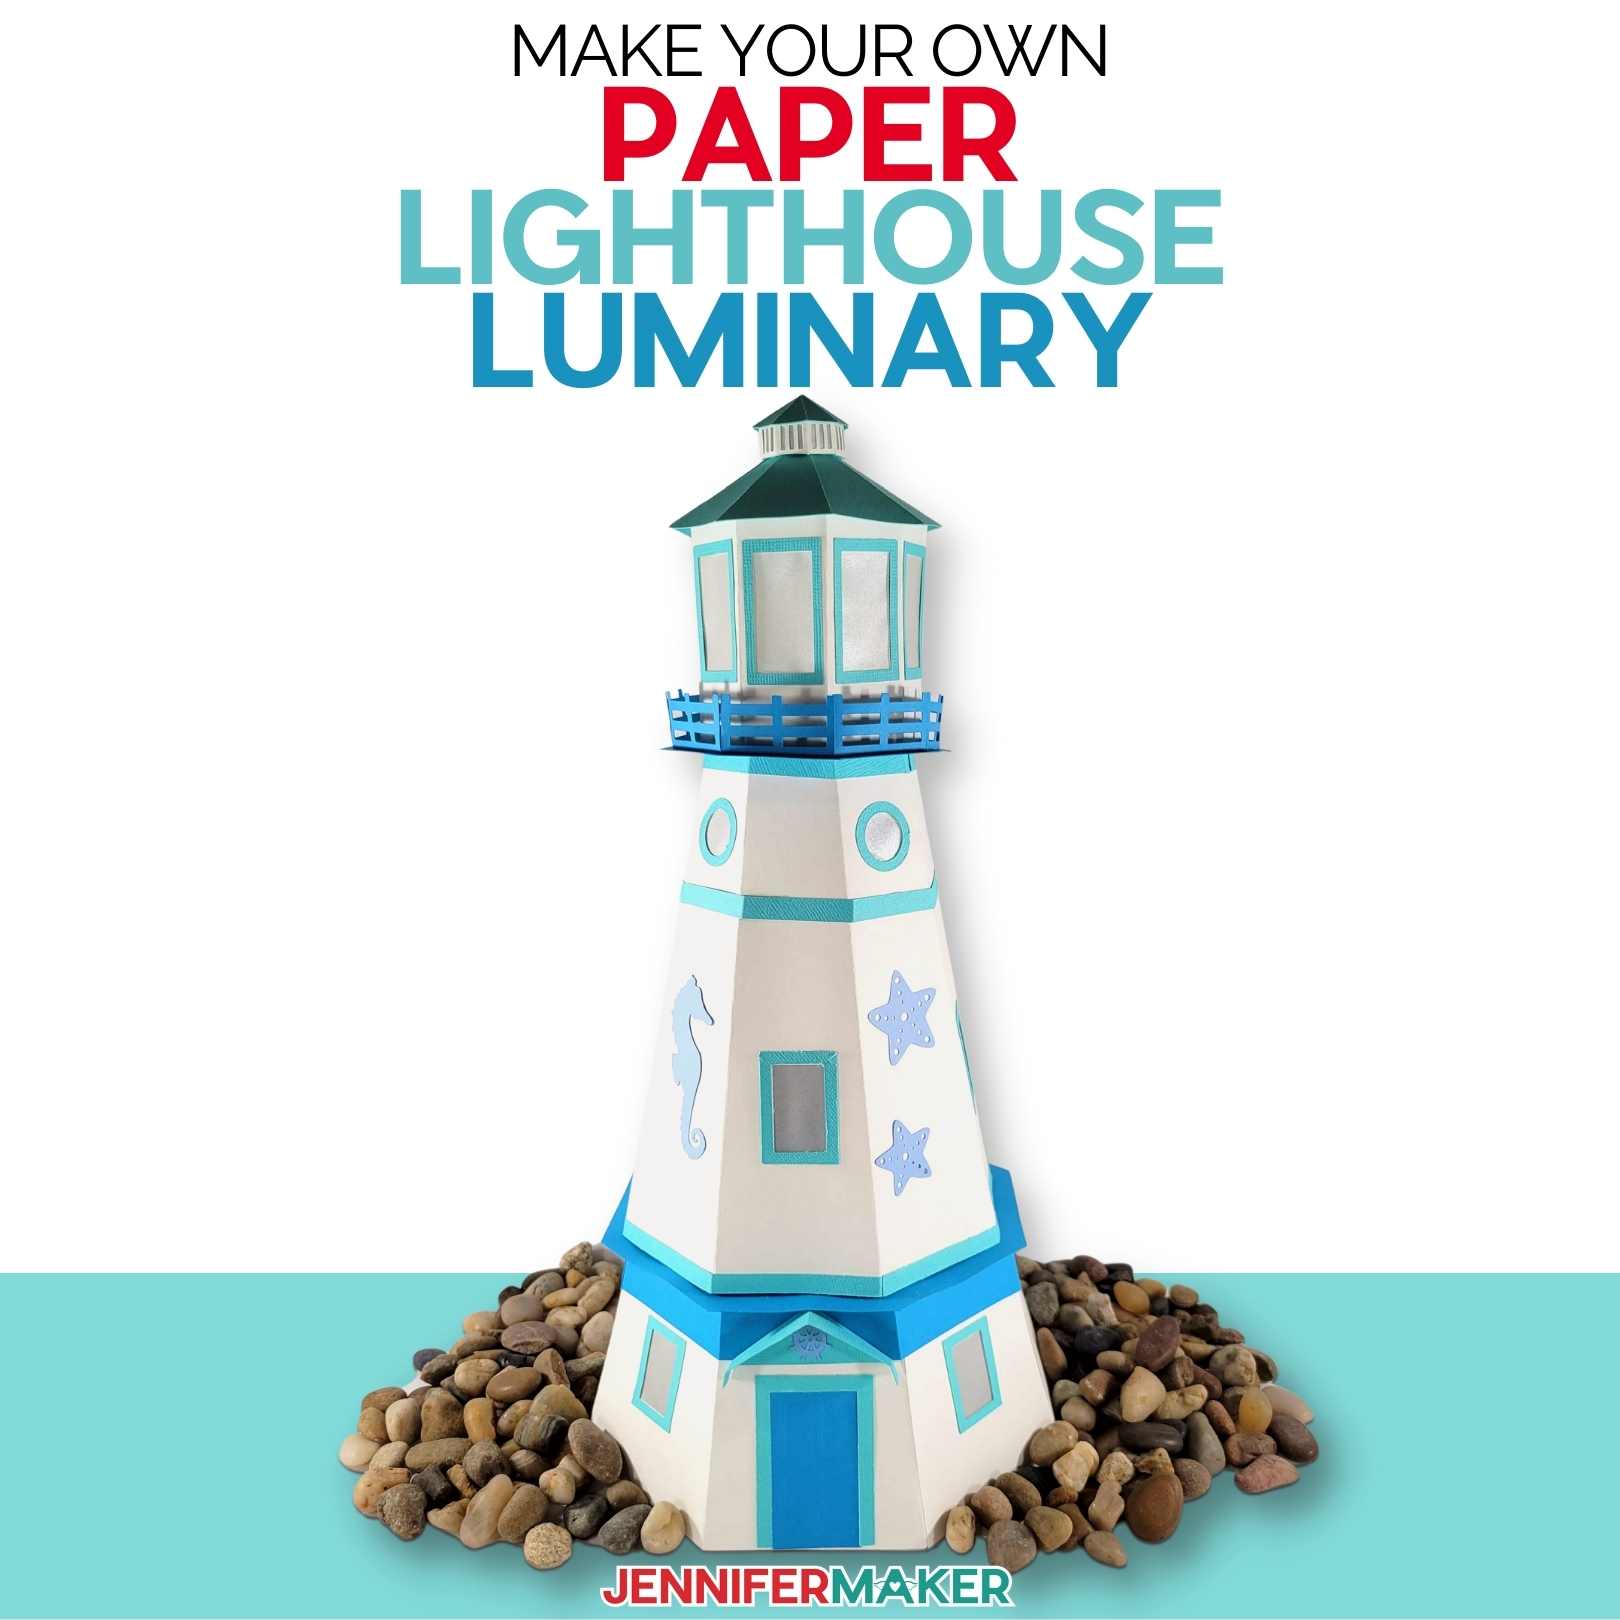 Paper Lighthouse Luminary with LED tealights - Cut on a Cricut! - Free SVG cut files and printable pattern